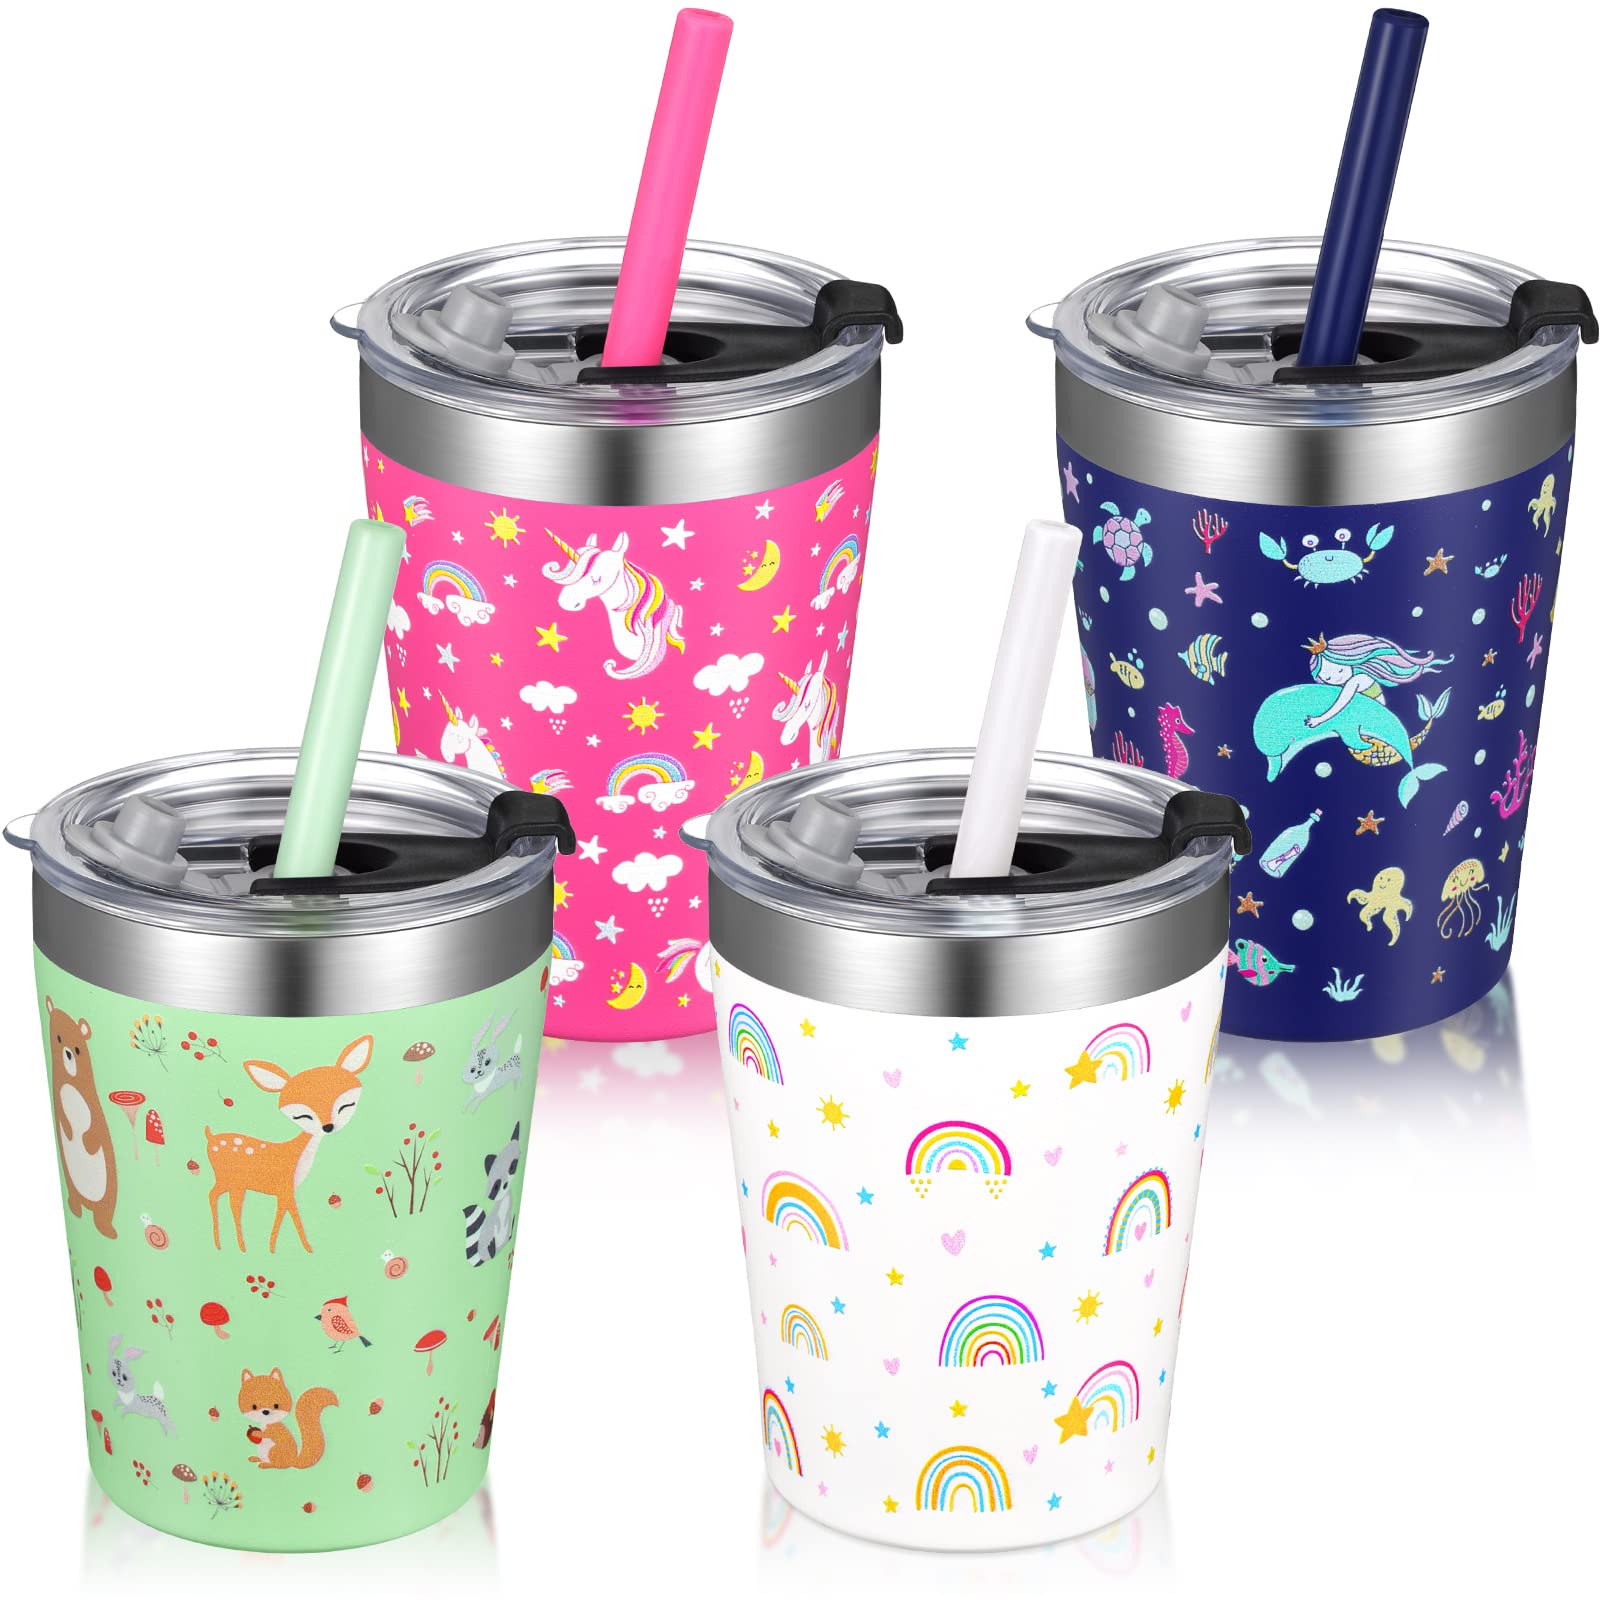 Toddler Baby Sippy Cup Lid Straw Spill-Proof Cup Cover Silicone